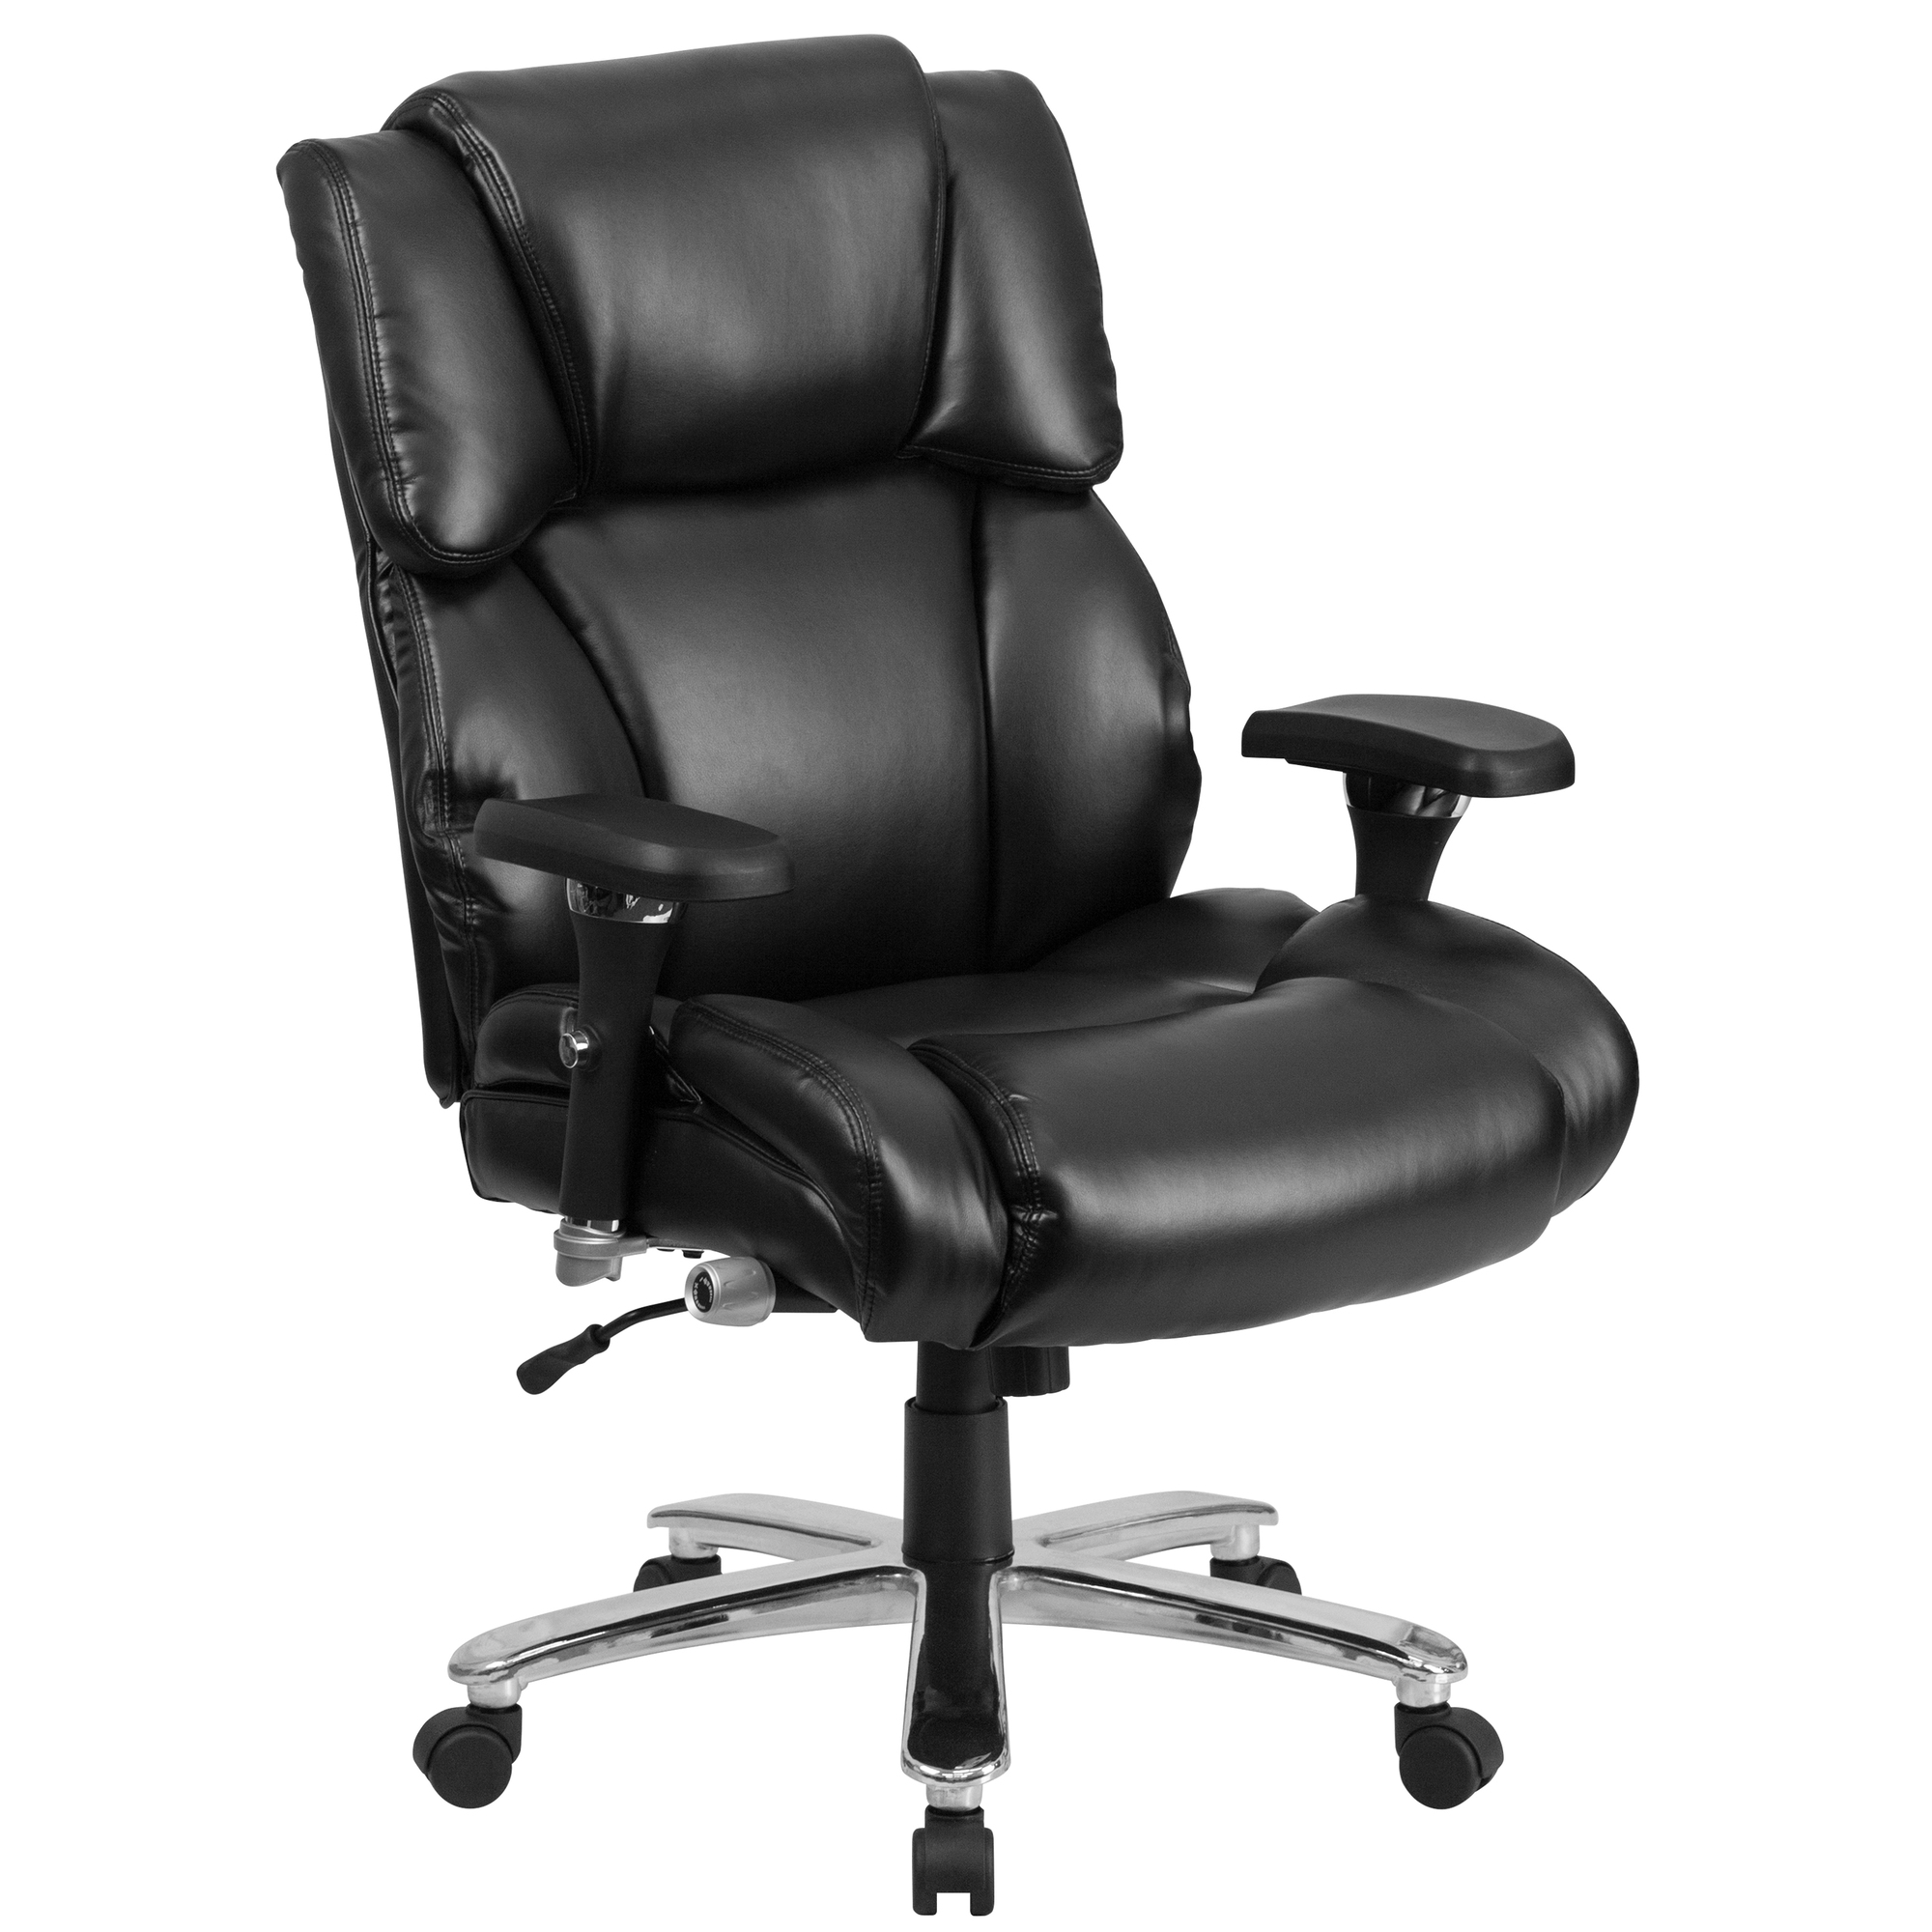 400 lb. Rated High Back Black LeatherSoft Chair, Primary Color Black, Included (qty.) 1, Model - Flash Furniture GO2149LEA